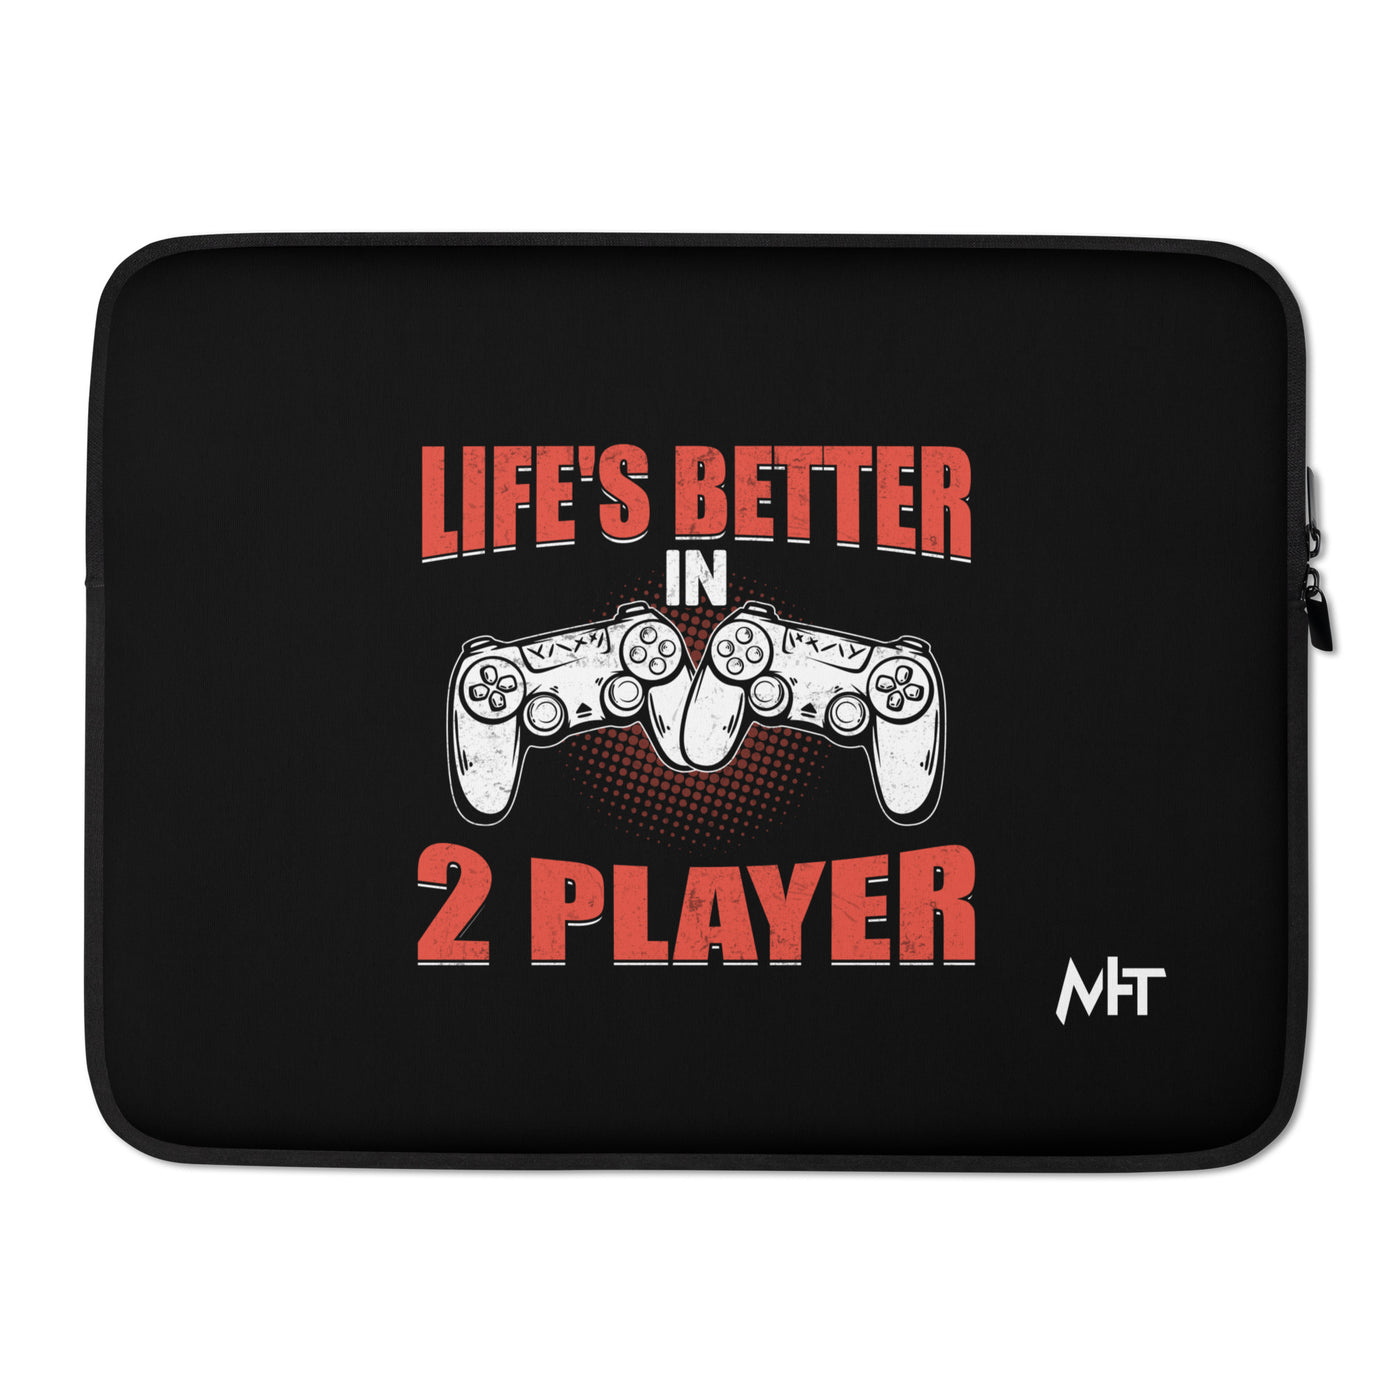 Life's Better in Two Players - Laptop Sleeve